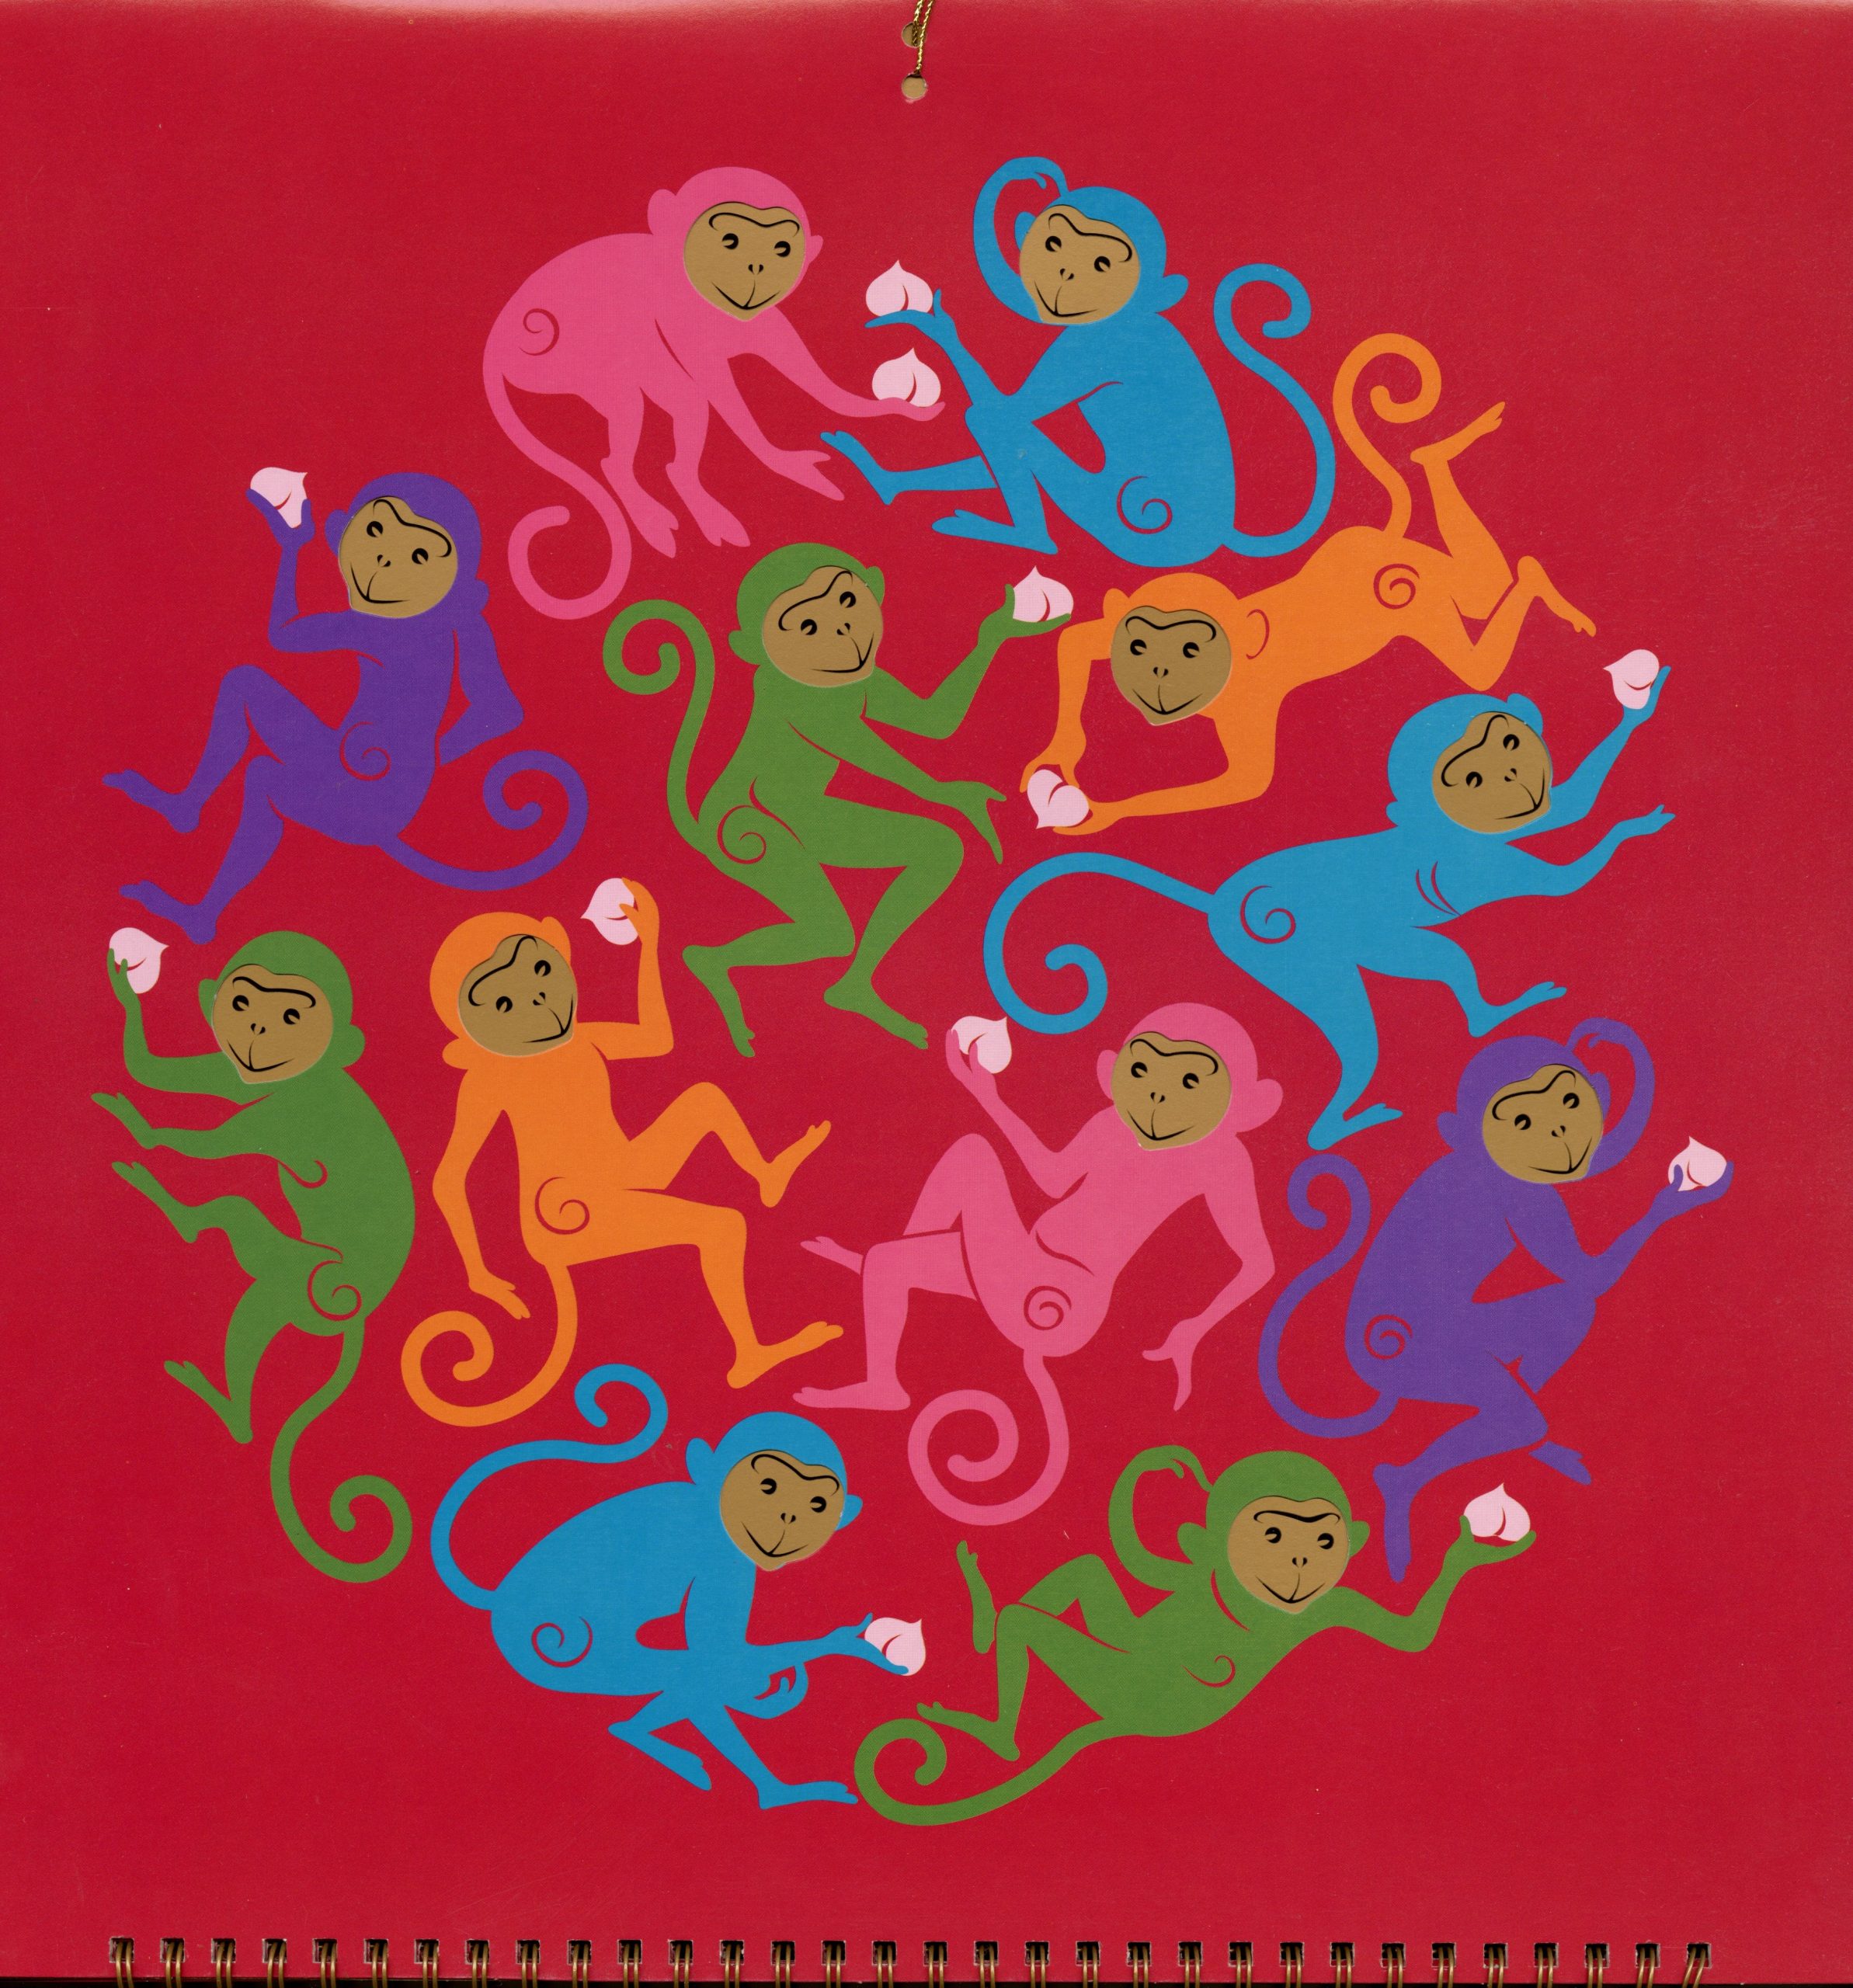 In a circular pattern are the outlines of a group of colorful monkeys. Each holding a peach, sign of longevity.